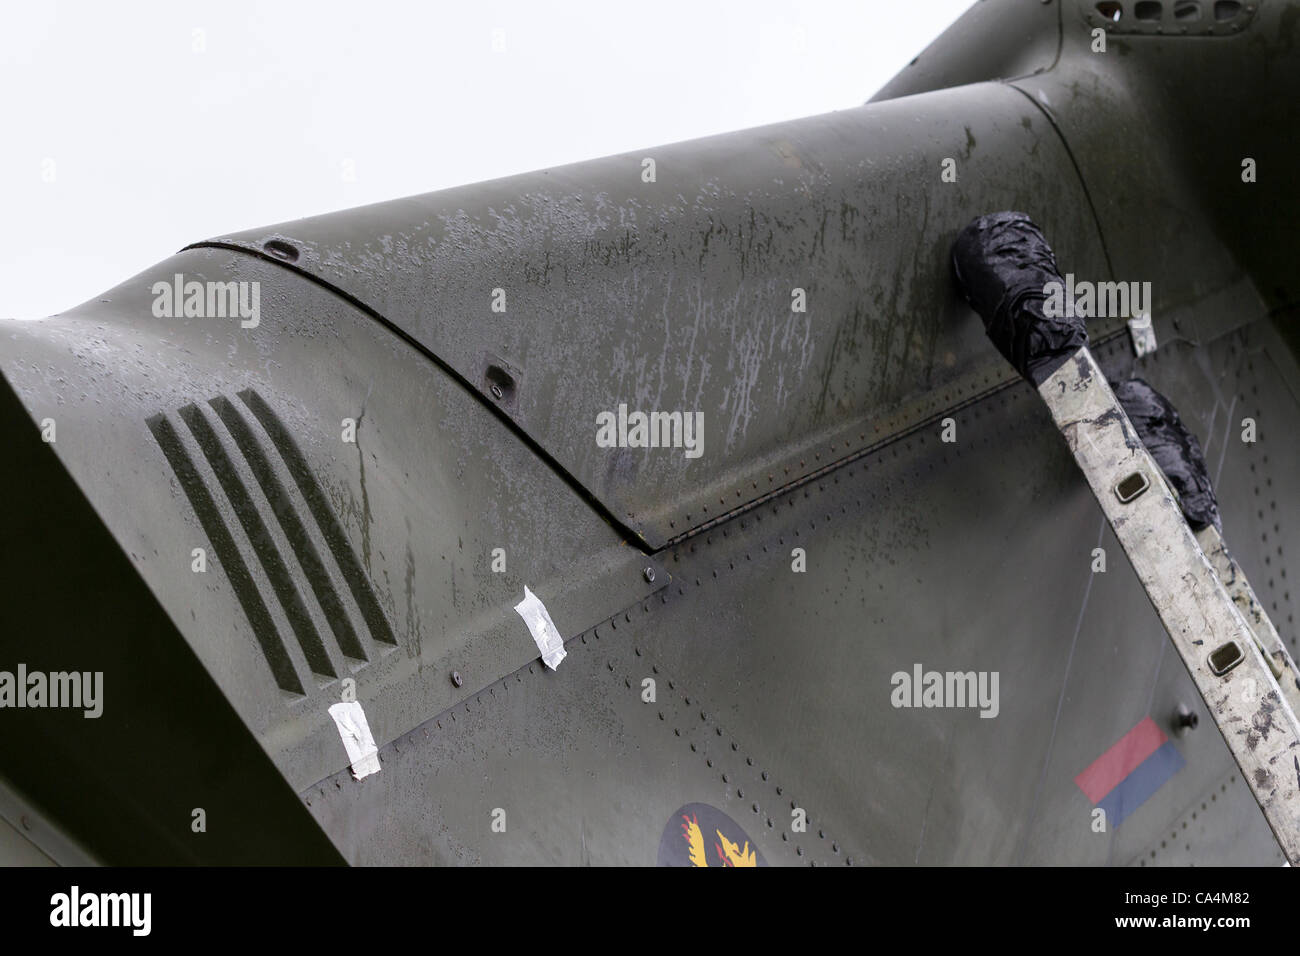 2012-06-07. Stanwick, Northamptonshire, UK. RAF Merlin mk3 helicopter grounded at a field in Stanwick on 06-06-2012 due to a loose panel near the rear rotor. After the repairs they hope to return to RAF Benson later this morning. Stock Photo